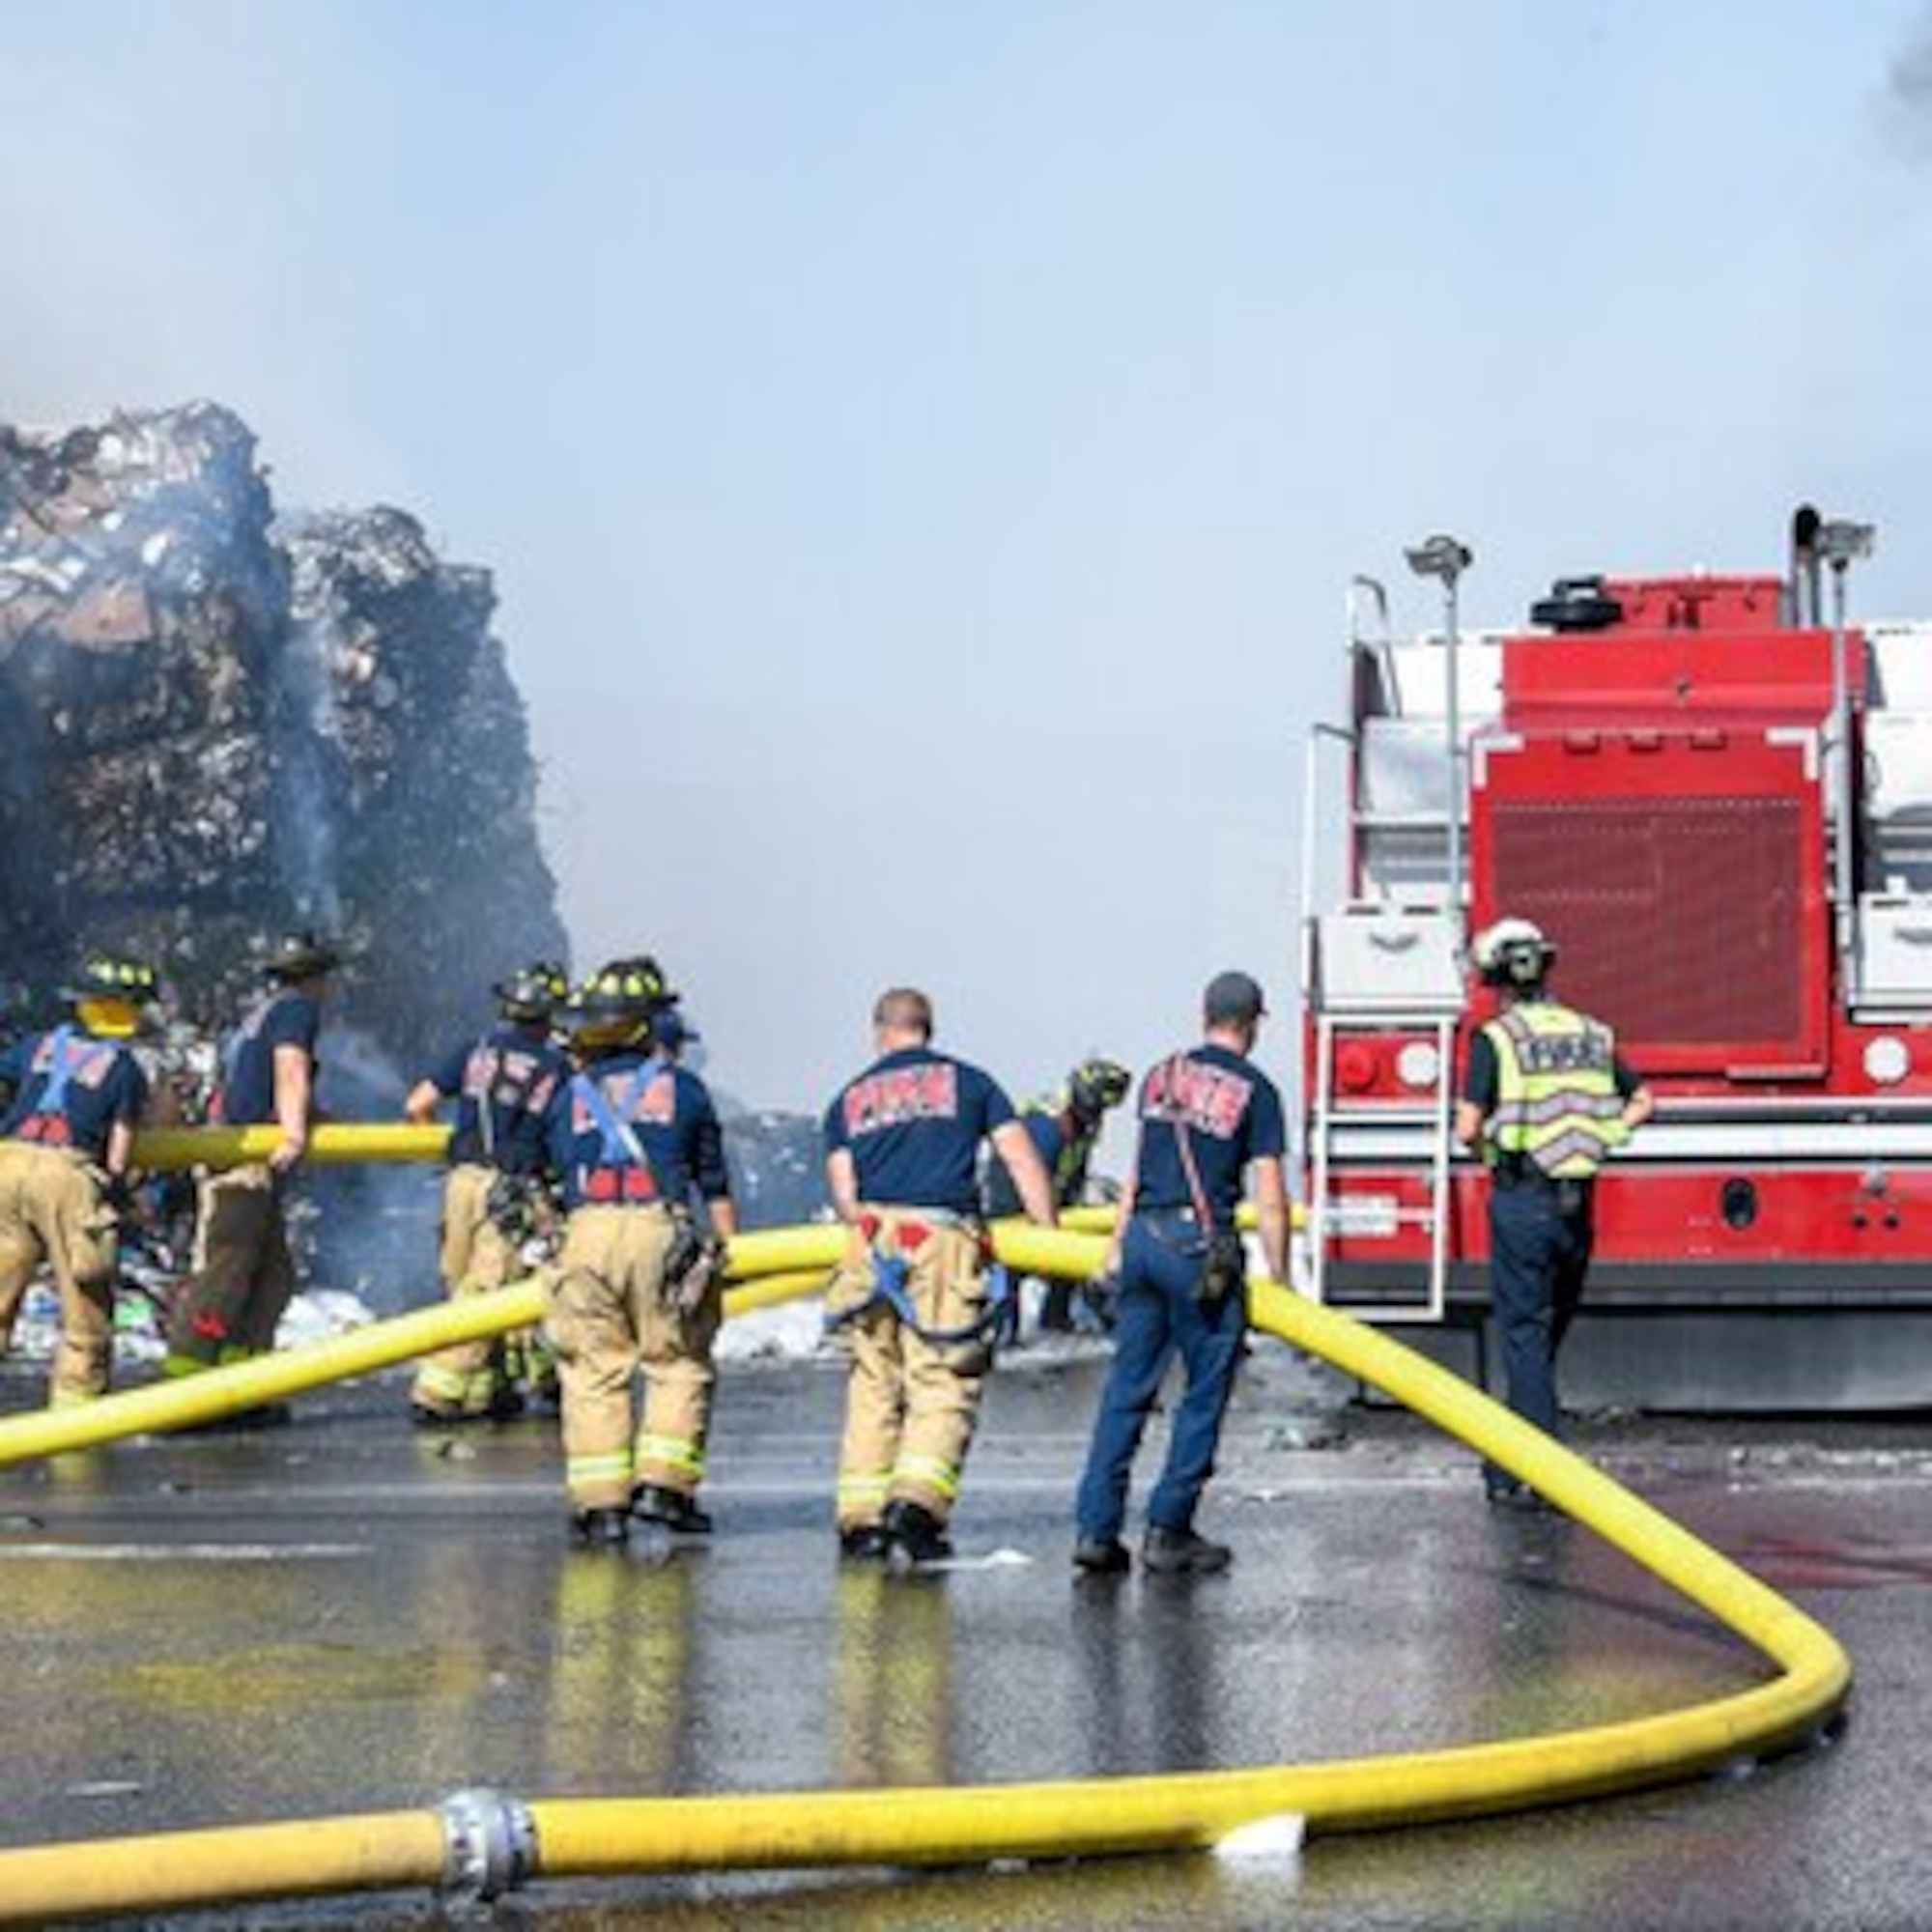 Firefighters from Kirtland Air Force Base, New Mexico, respond to a fire in Albuquerque.